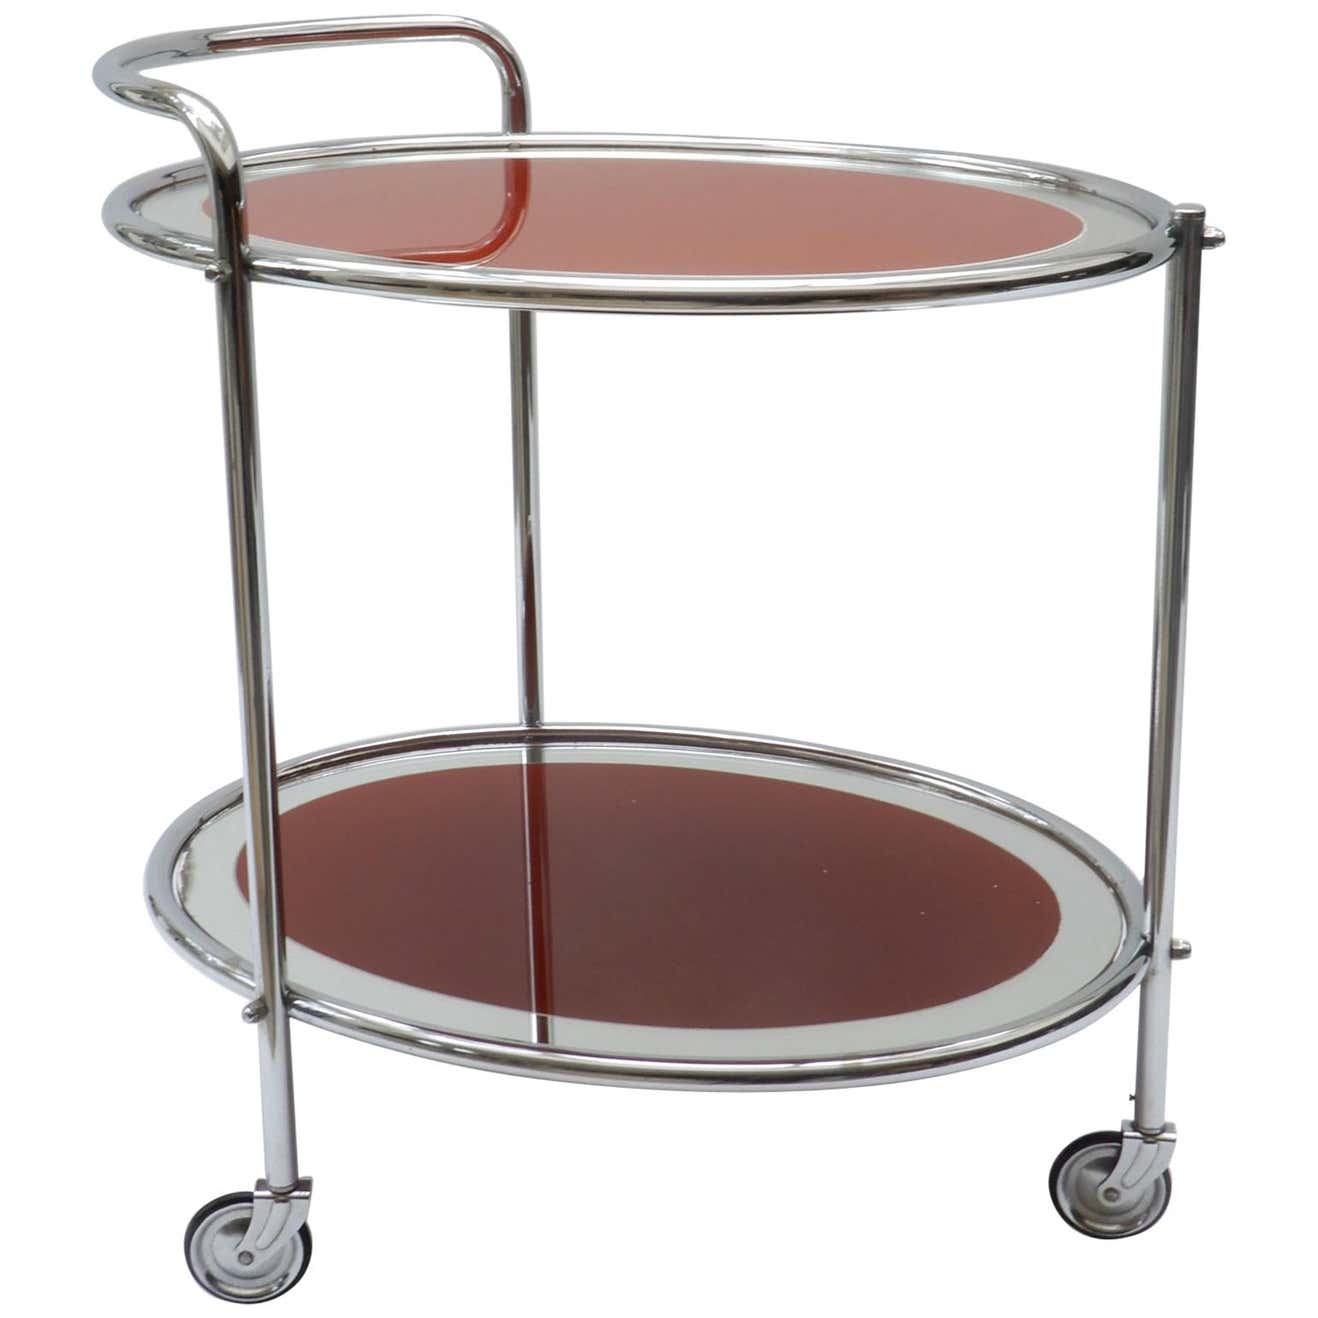 Oval Chrome and Rust Glass Mirrored Bar Cart, 1950s